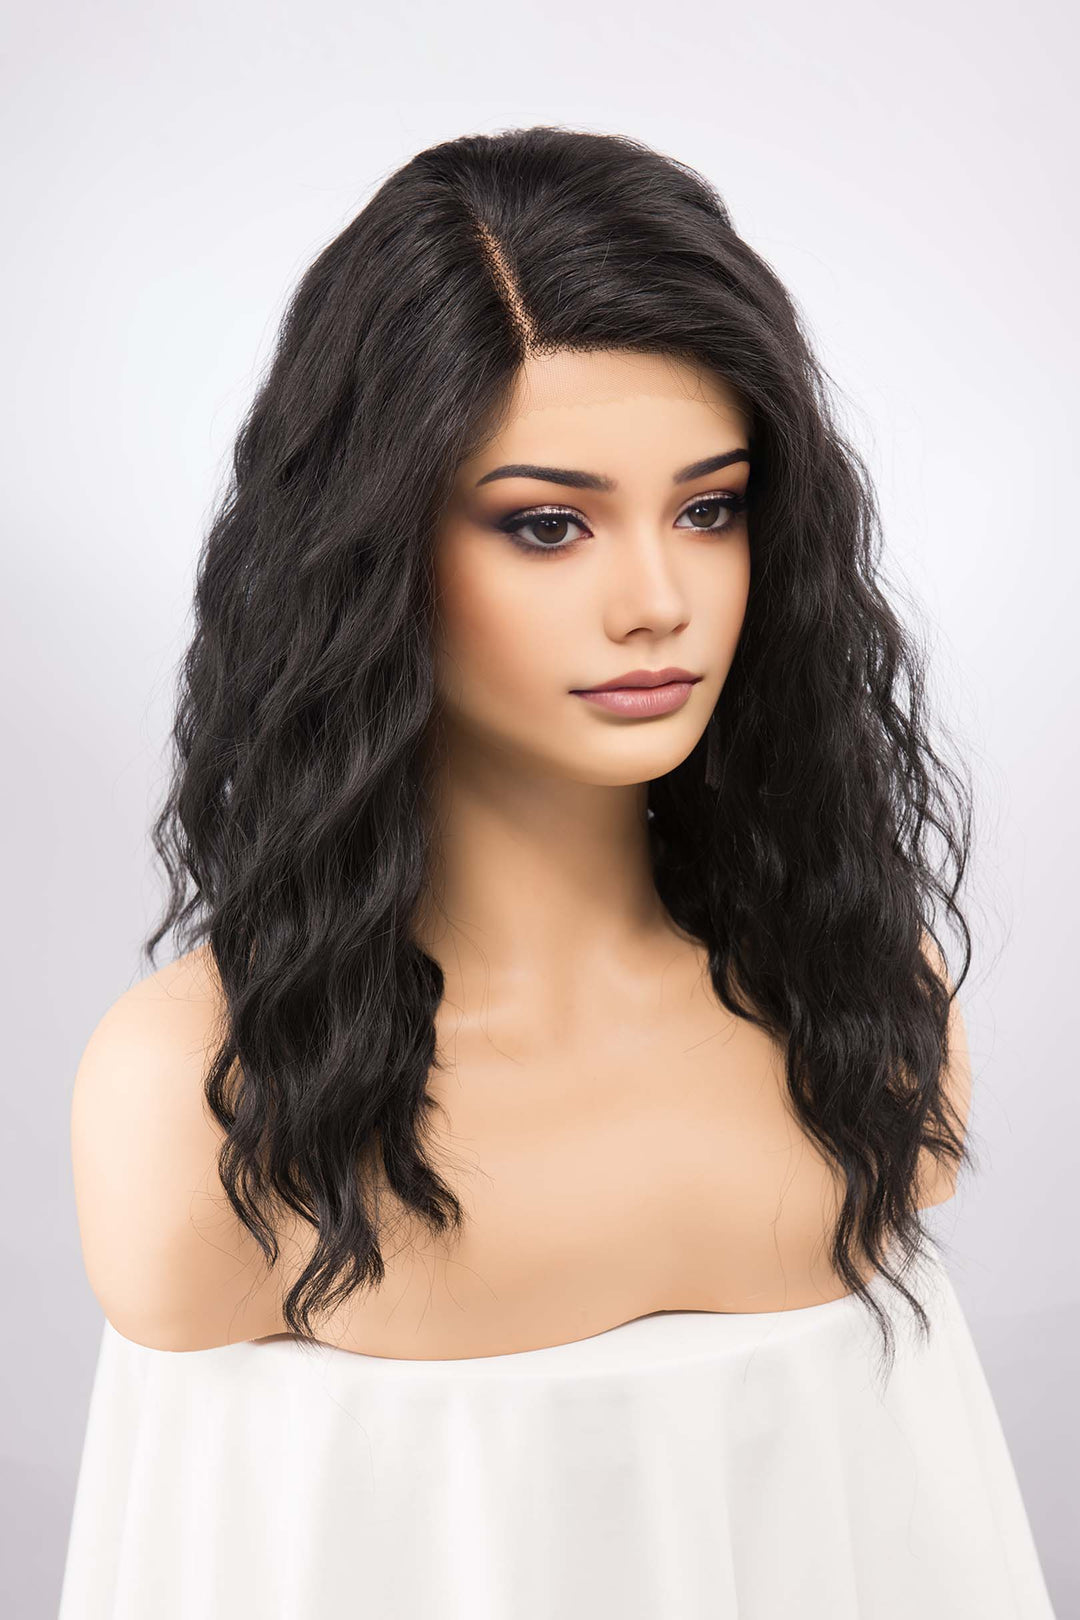 Natural Black Wavy Wig Jet Black Lace Front Wig Beach Wavy Wig Daily Use Natural Wig Drag Queen Wig Halloween Costume Wig Micah